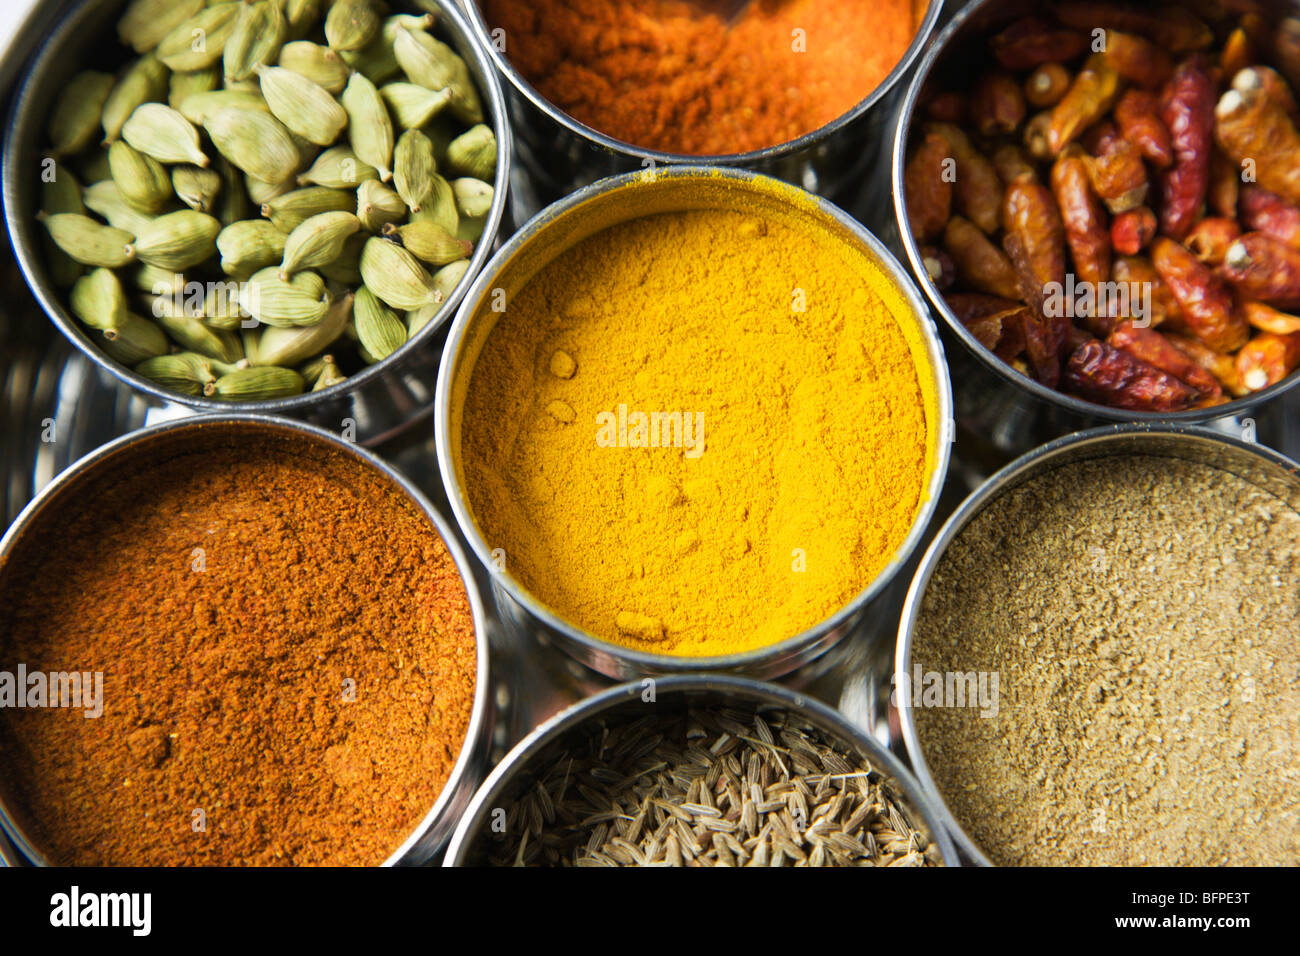 https://c8.alamy.com/comp/BFPE3T/masala-dabba-with-spices-BFPE3T.jpg